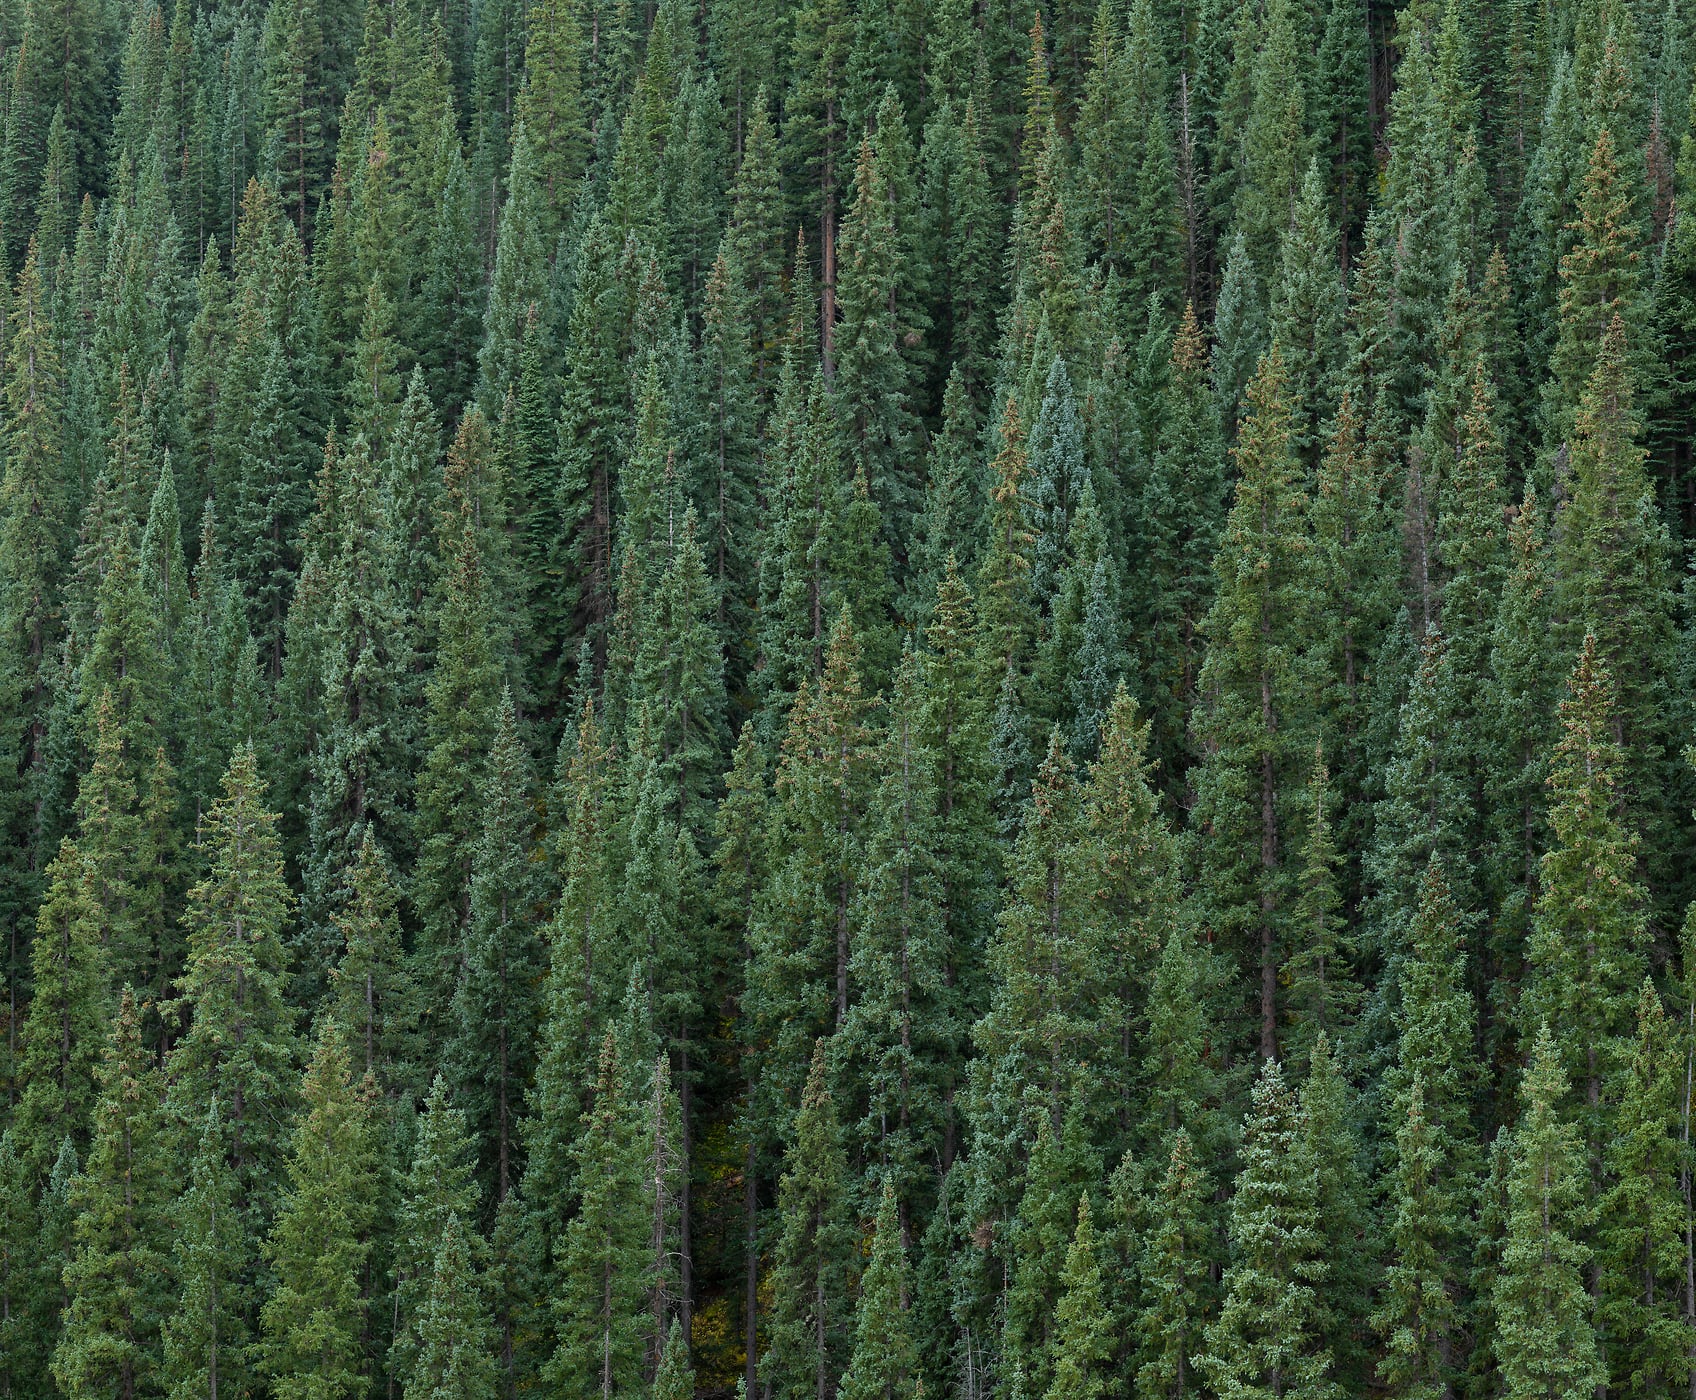 198 megapixels! A very high resolution, large-format VAST photo print of trees with a square aspect ratio; nature photograph created by Greg Probst in San Juan National Forest, Colorado.